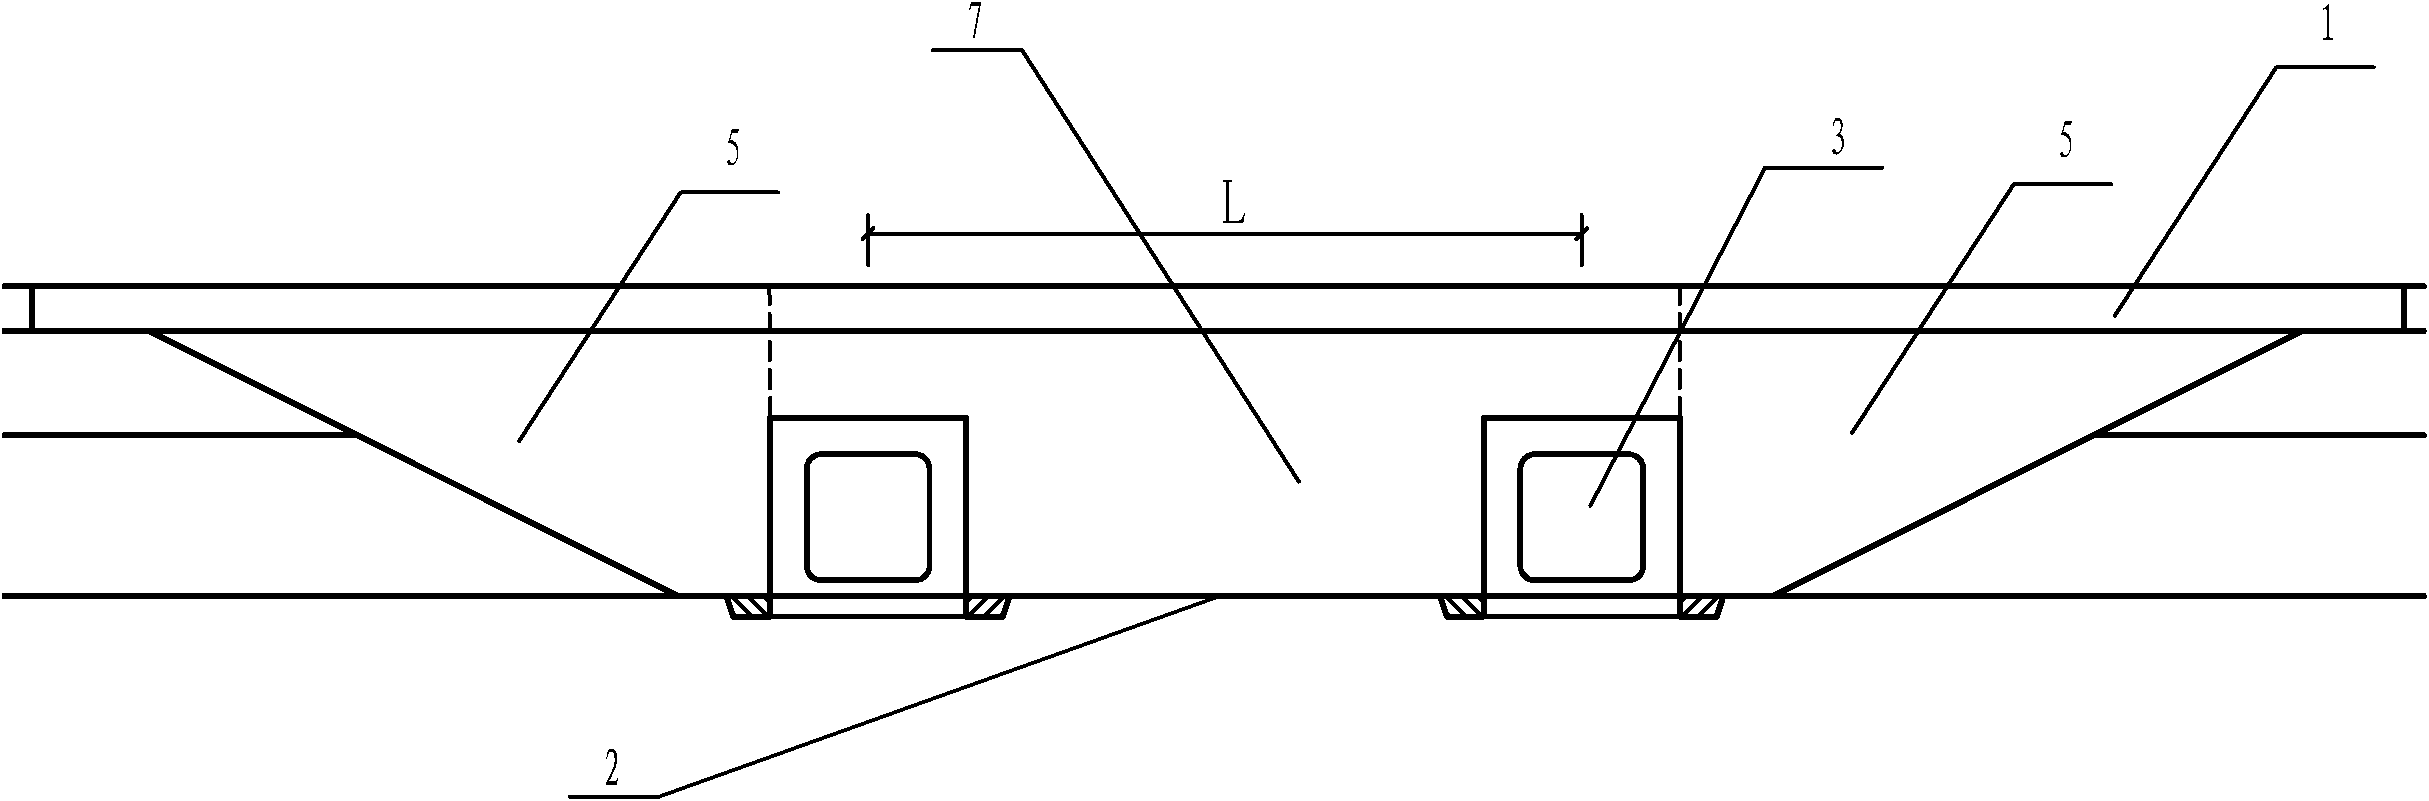 Short roadbed transition section structure between culverts of high speed railway